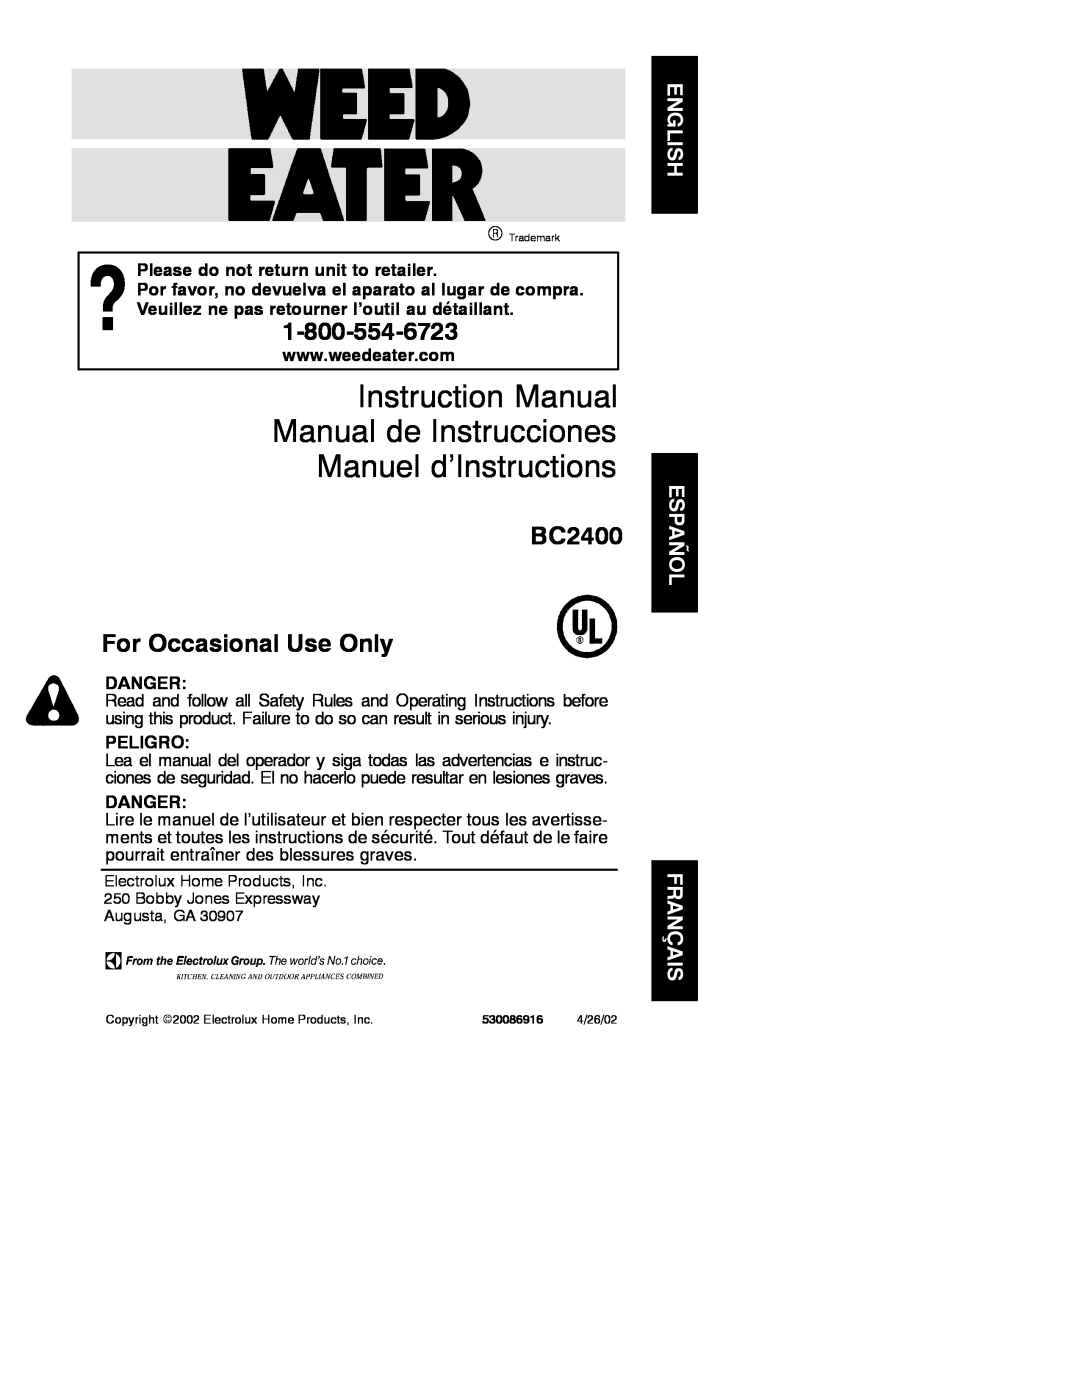 Weed Eater 530086916 instruction manual Manuel d’Instructions, BC2400 For Occasional Use Only, Danger, Peligro 